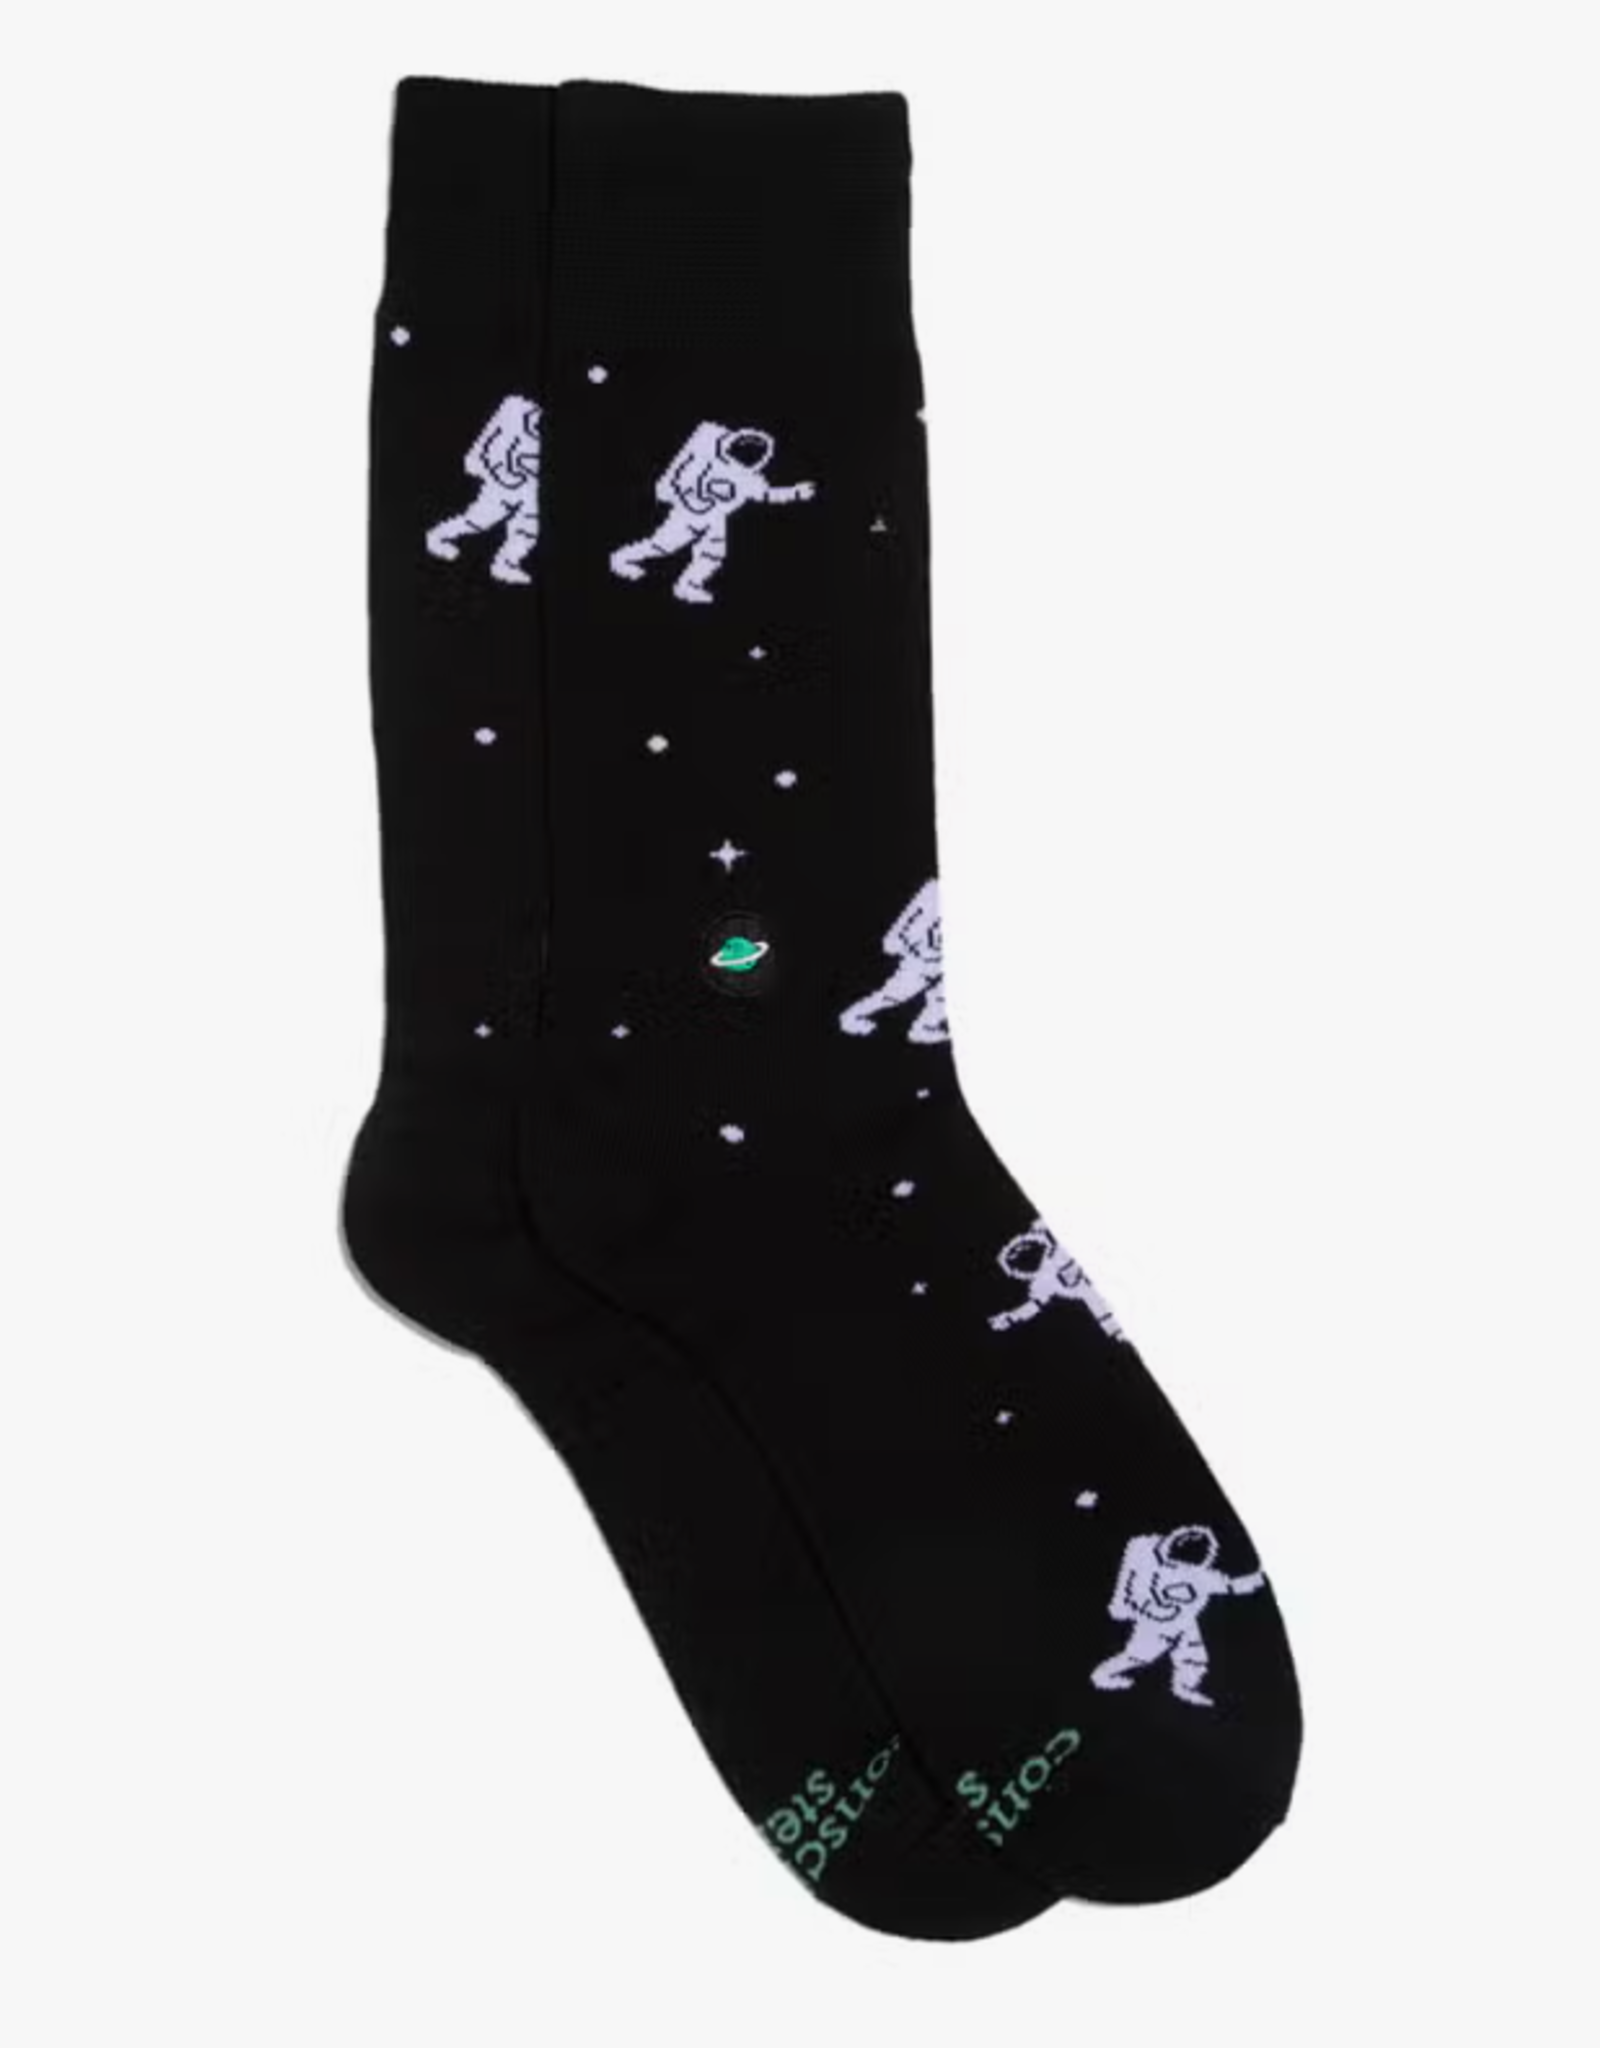 Conscious Step Socks that Support Space Exploration (Floating Astronauts)